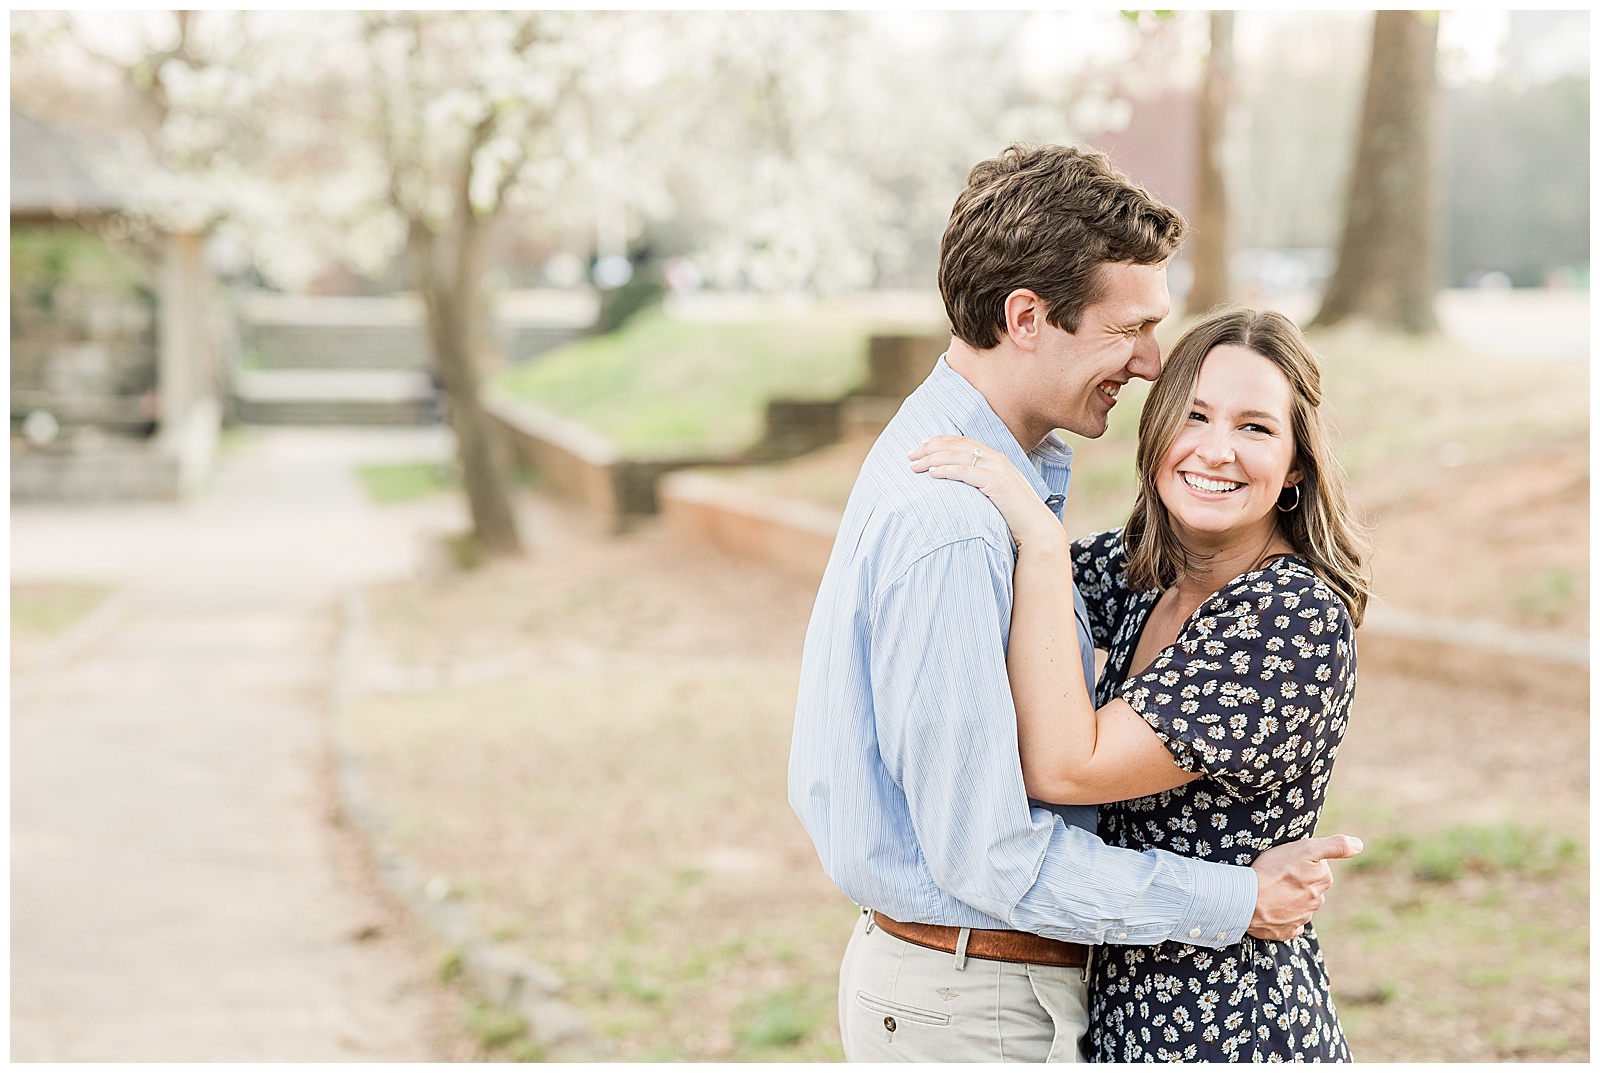 Abbey and Jared - Piedmont Park Engagement Session